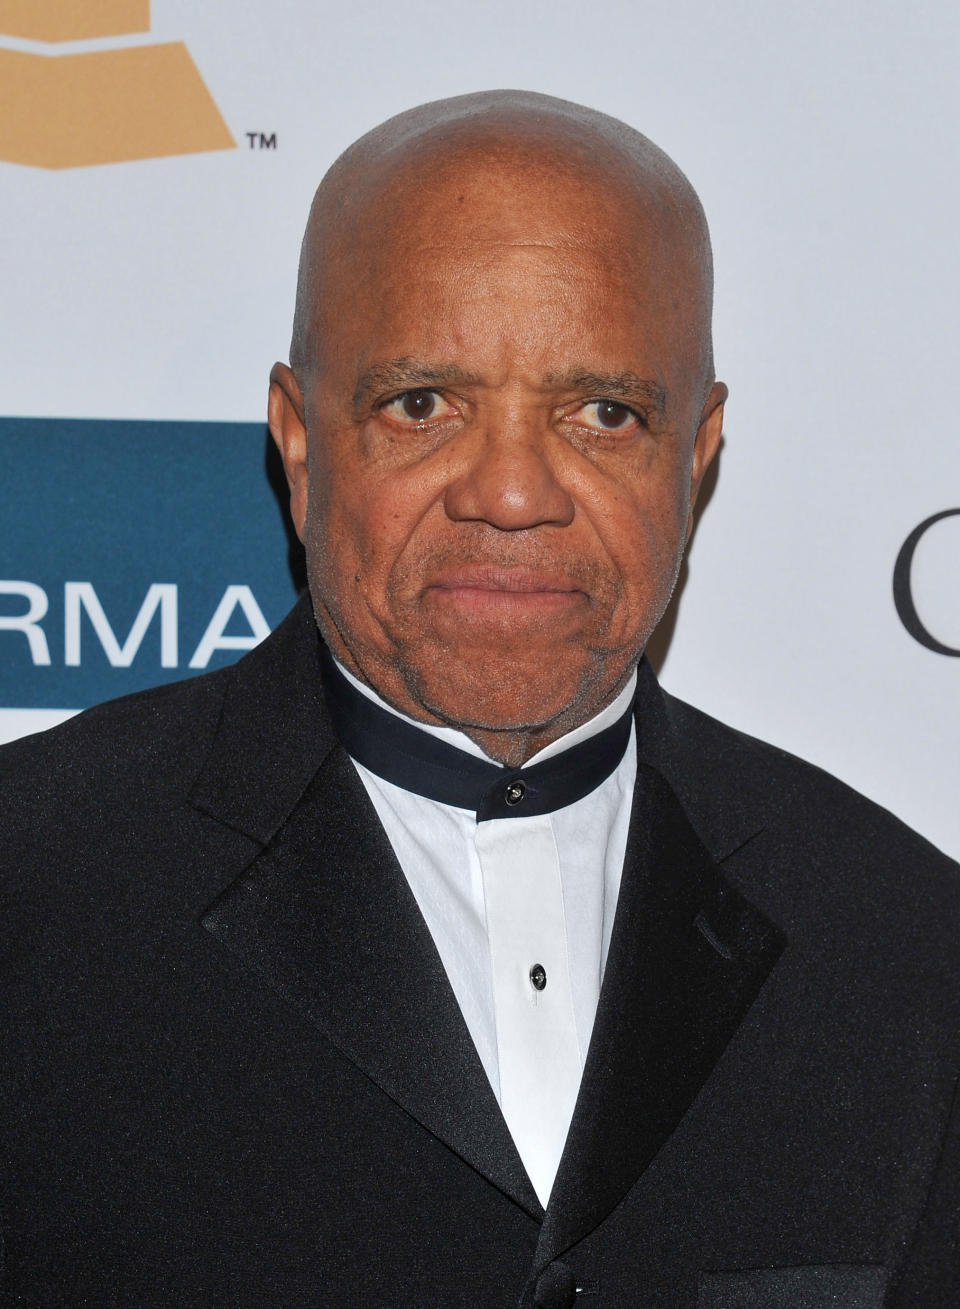 FILE - This Feb. 11, 2012 file photo shows Motown Records founder Berry Gordy Jr. arriving at the Pre-GRAMMY Gala & Salute to Industry Icons with Clive Davis honoring Richard Branson in Beverly Hills, Calif. A musical based on the life of legendary Motown Records founder Berry Gordy is set to open on Broadway next year. Producers said Tuesday, June 26, that "Motown," with 81-year-old Gordy writing his own book, will open in the spring of 2013 at a Nederlander Theatre to be announced. It will be directed by Charles Randolph-Wright. (AP Photo/Vince Bucci, file)